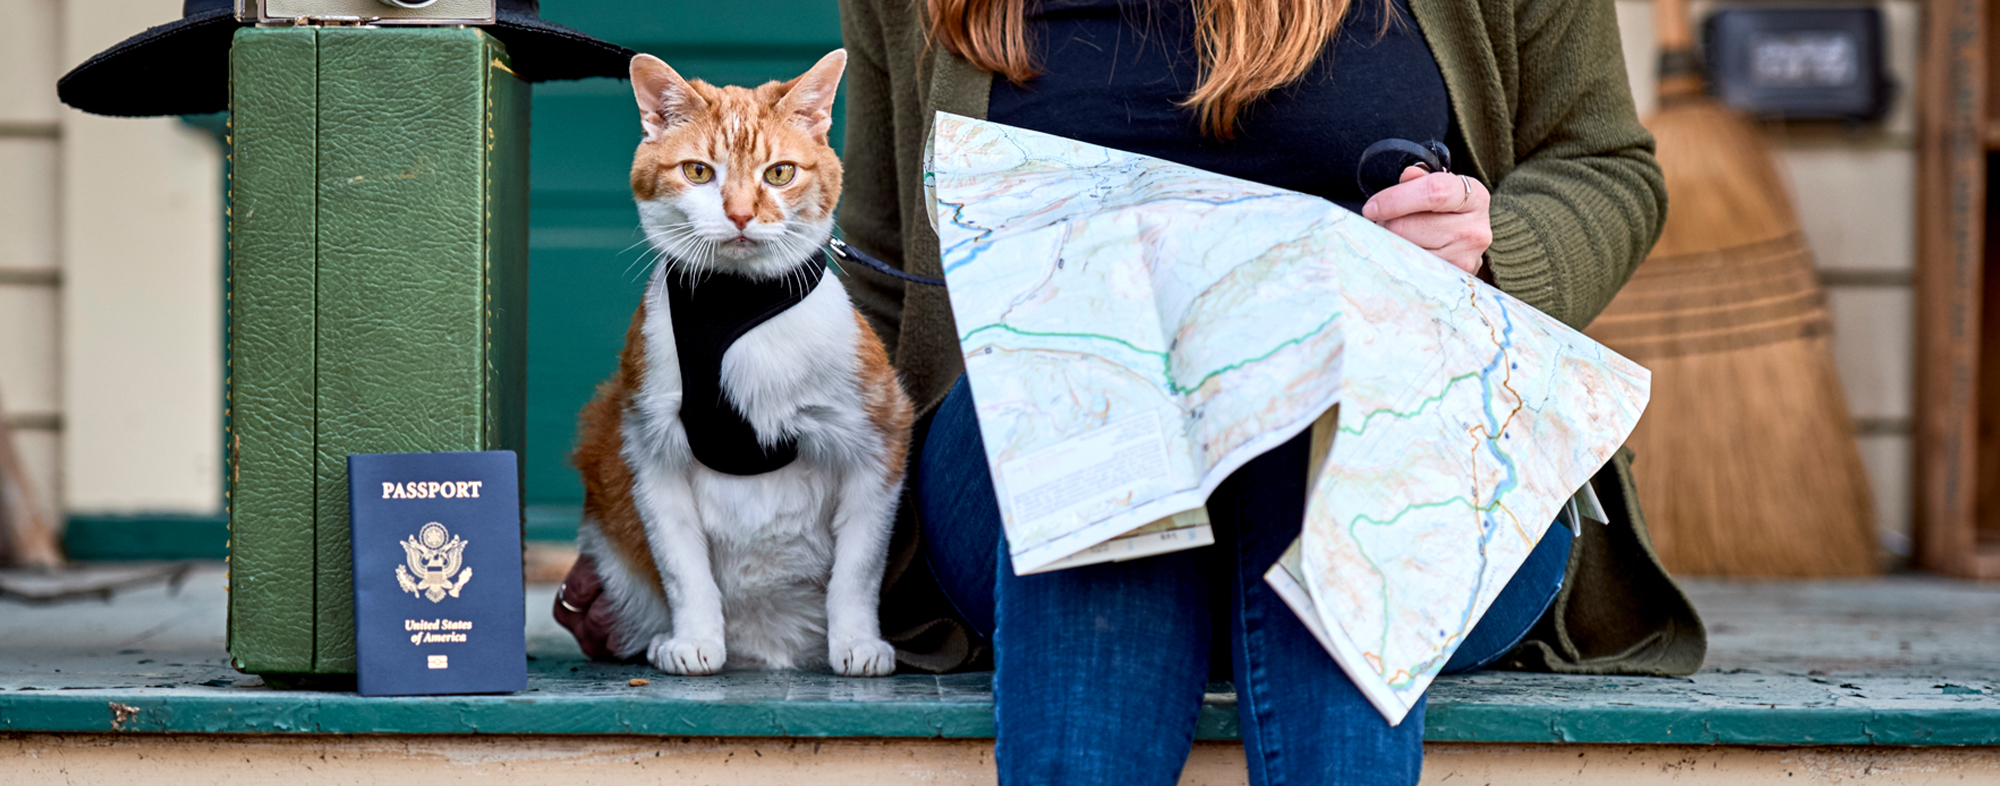 Owner consults a map, with her cat leased next to her, while traveling